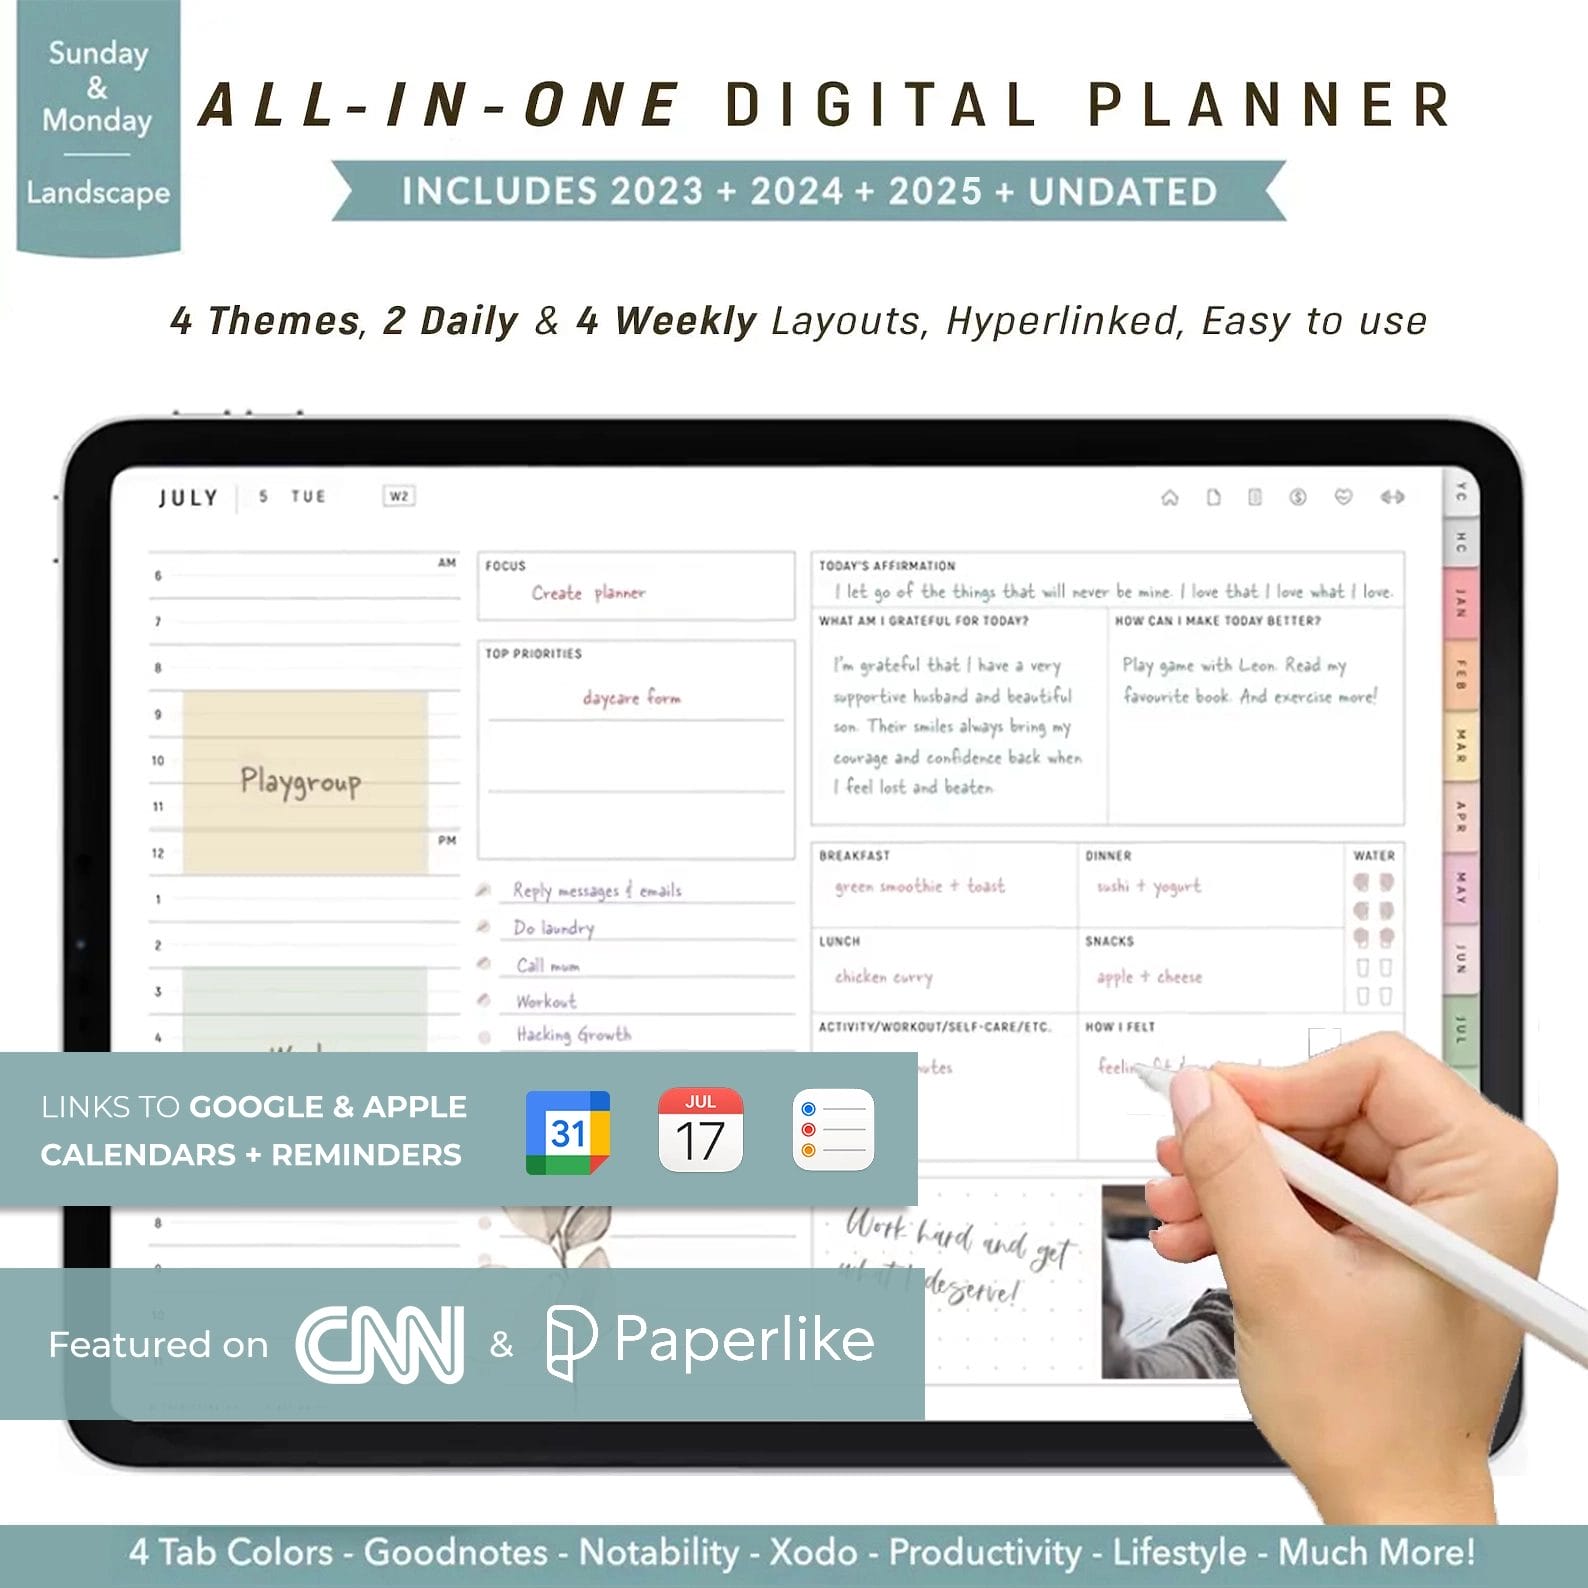 All-In-One Digital Planner